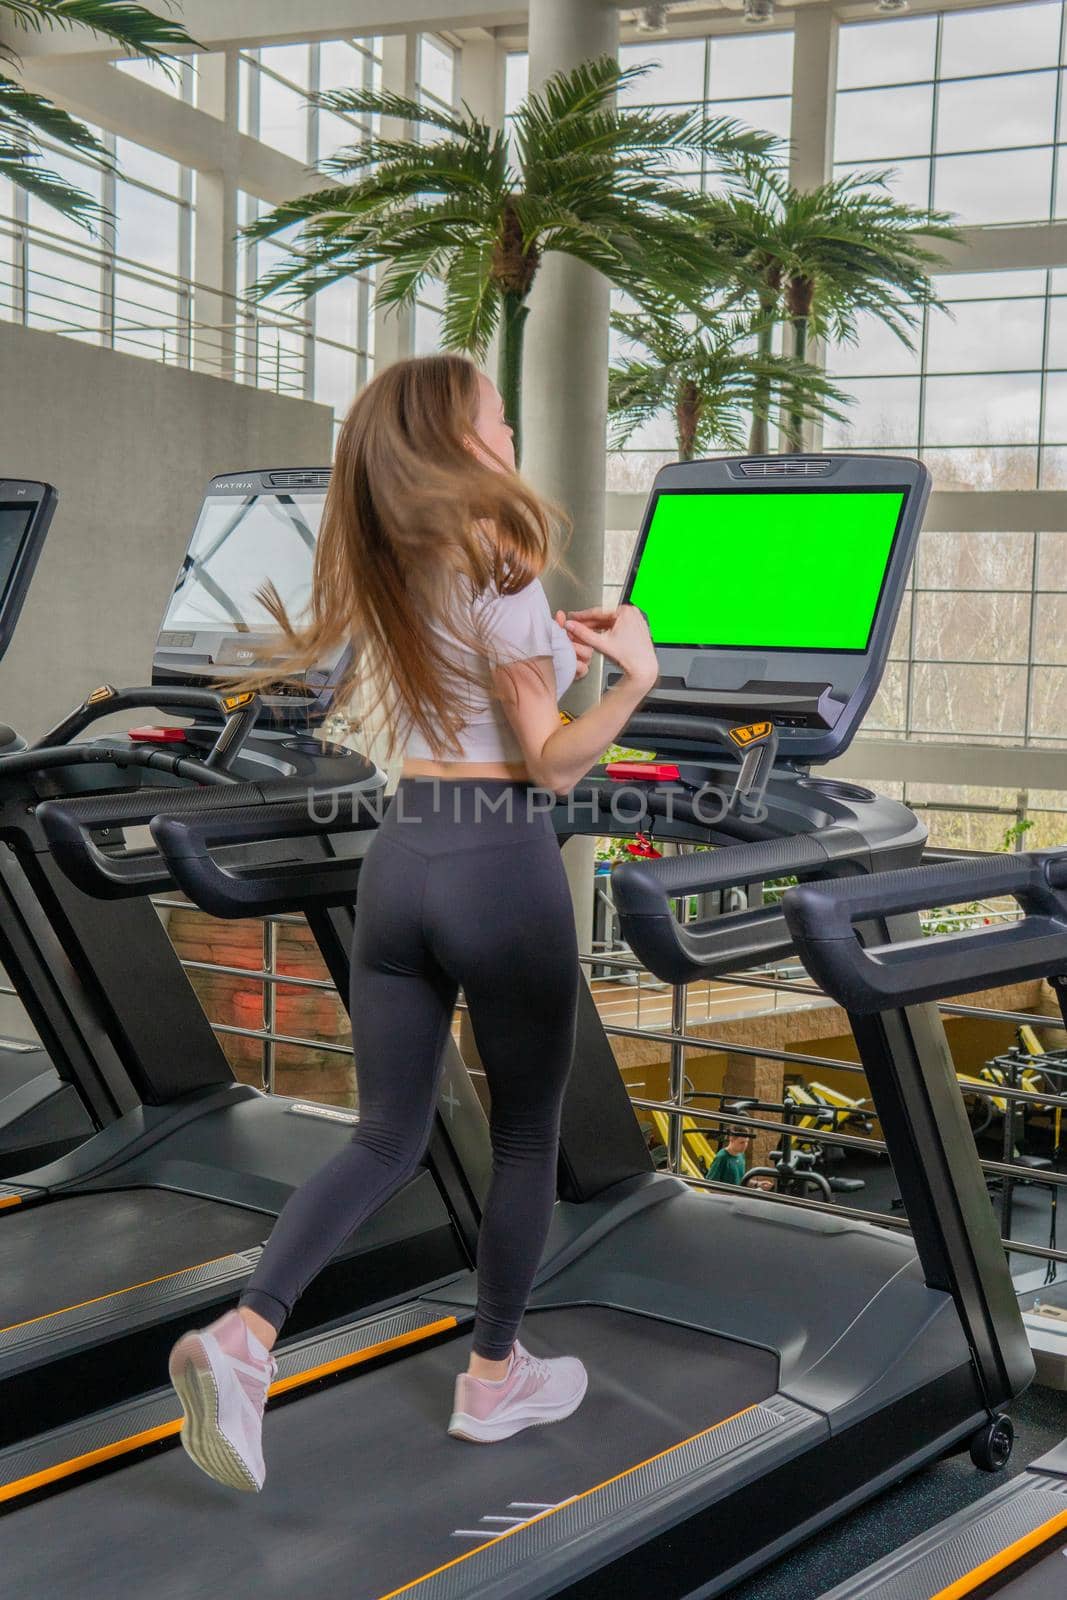 Indoors young length woman treadmill profile full running female, from workout healthy for athlete for training cardio, muscles together. Jogging legs slim, green screen